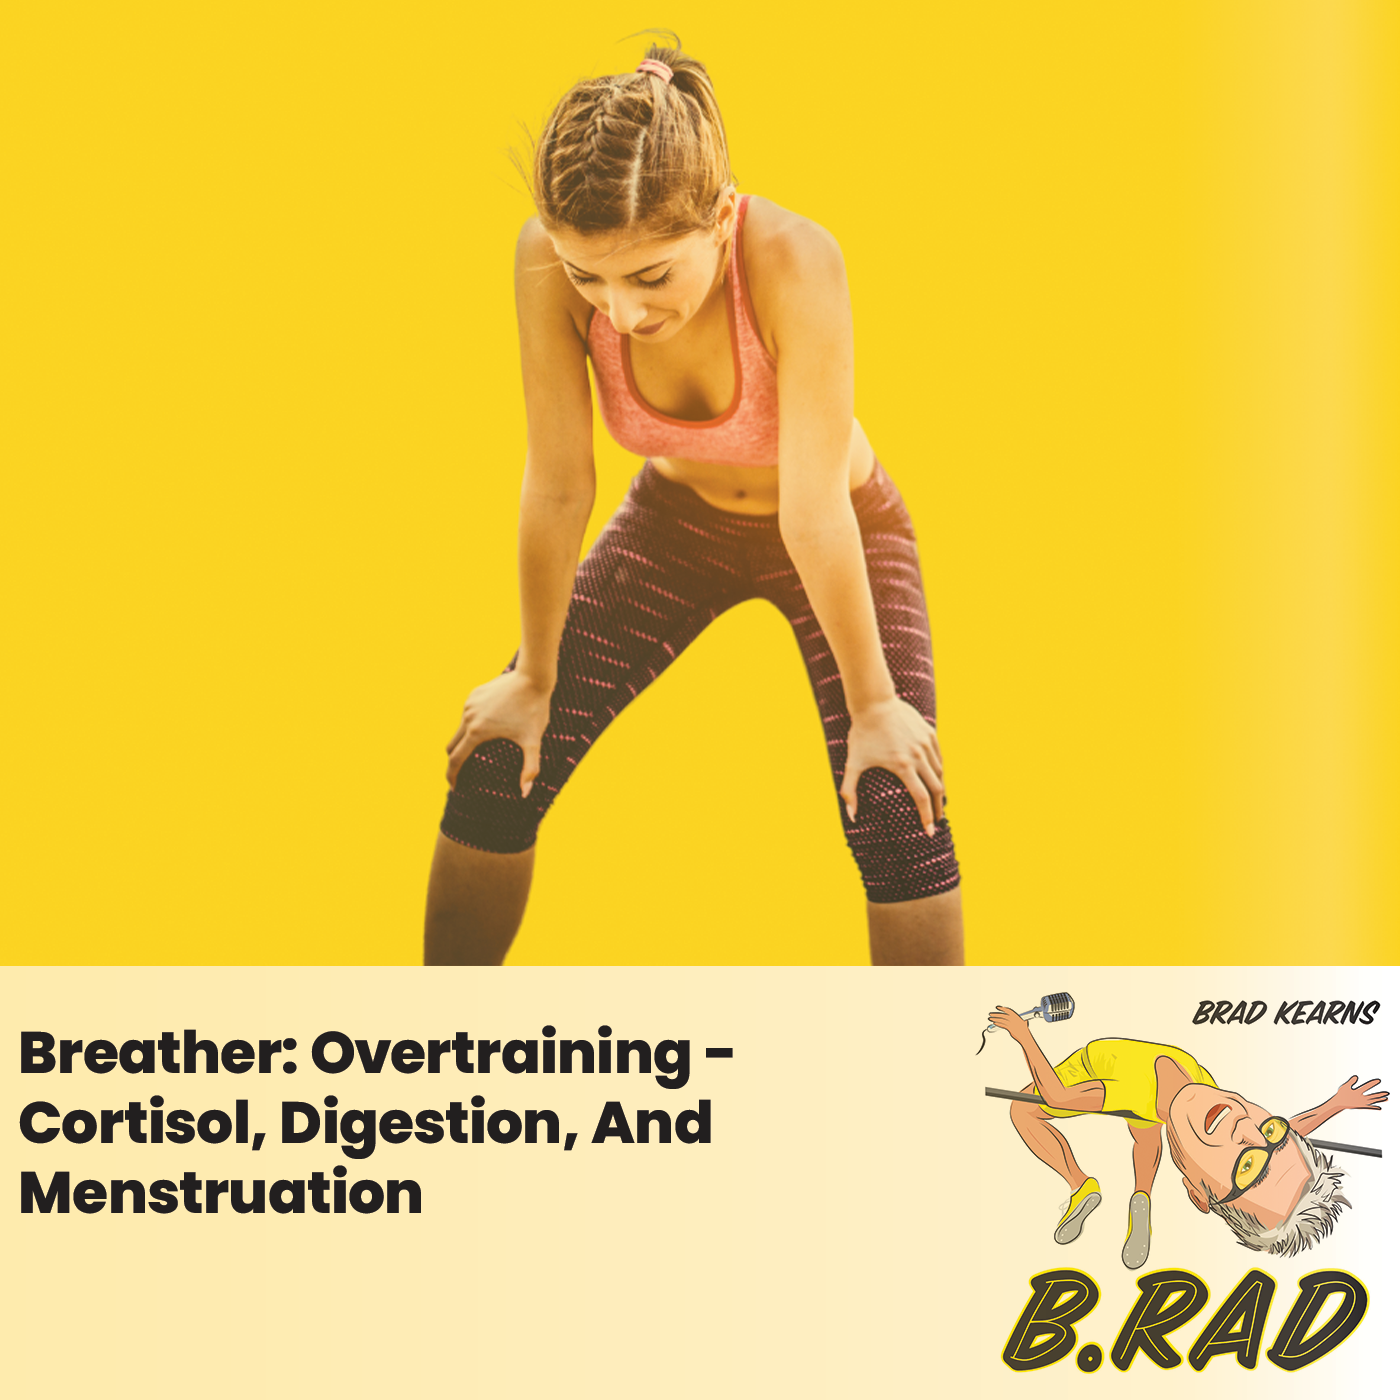 Breather: Cortisol, Digestion, And Menstruation